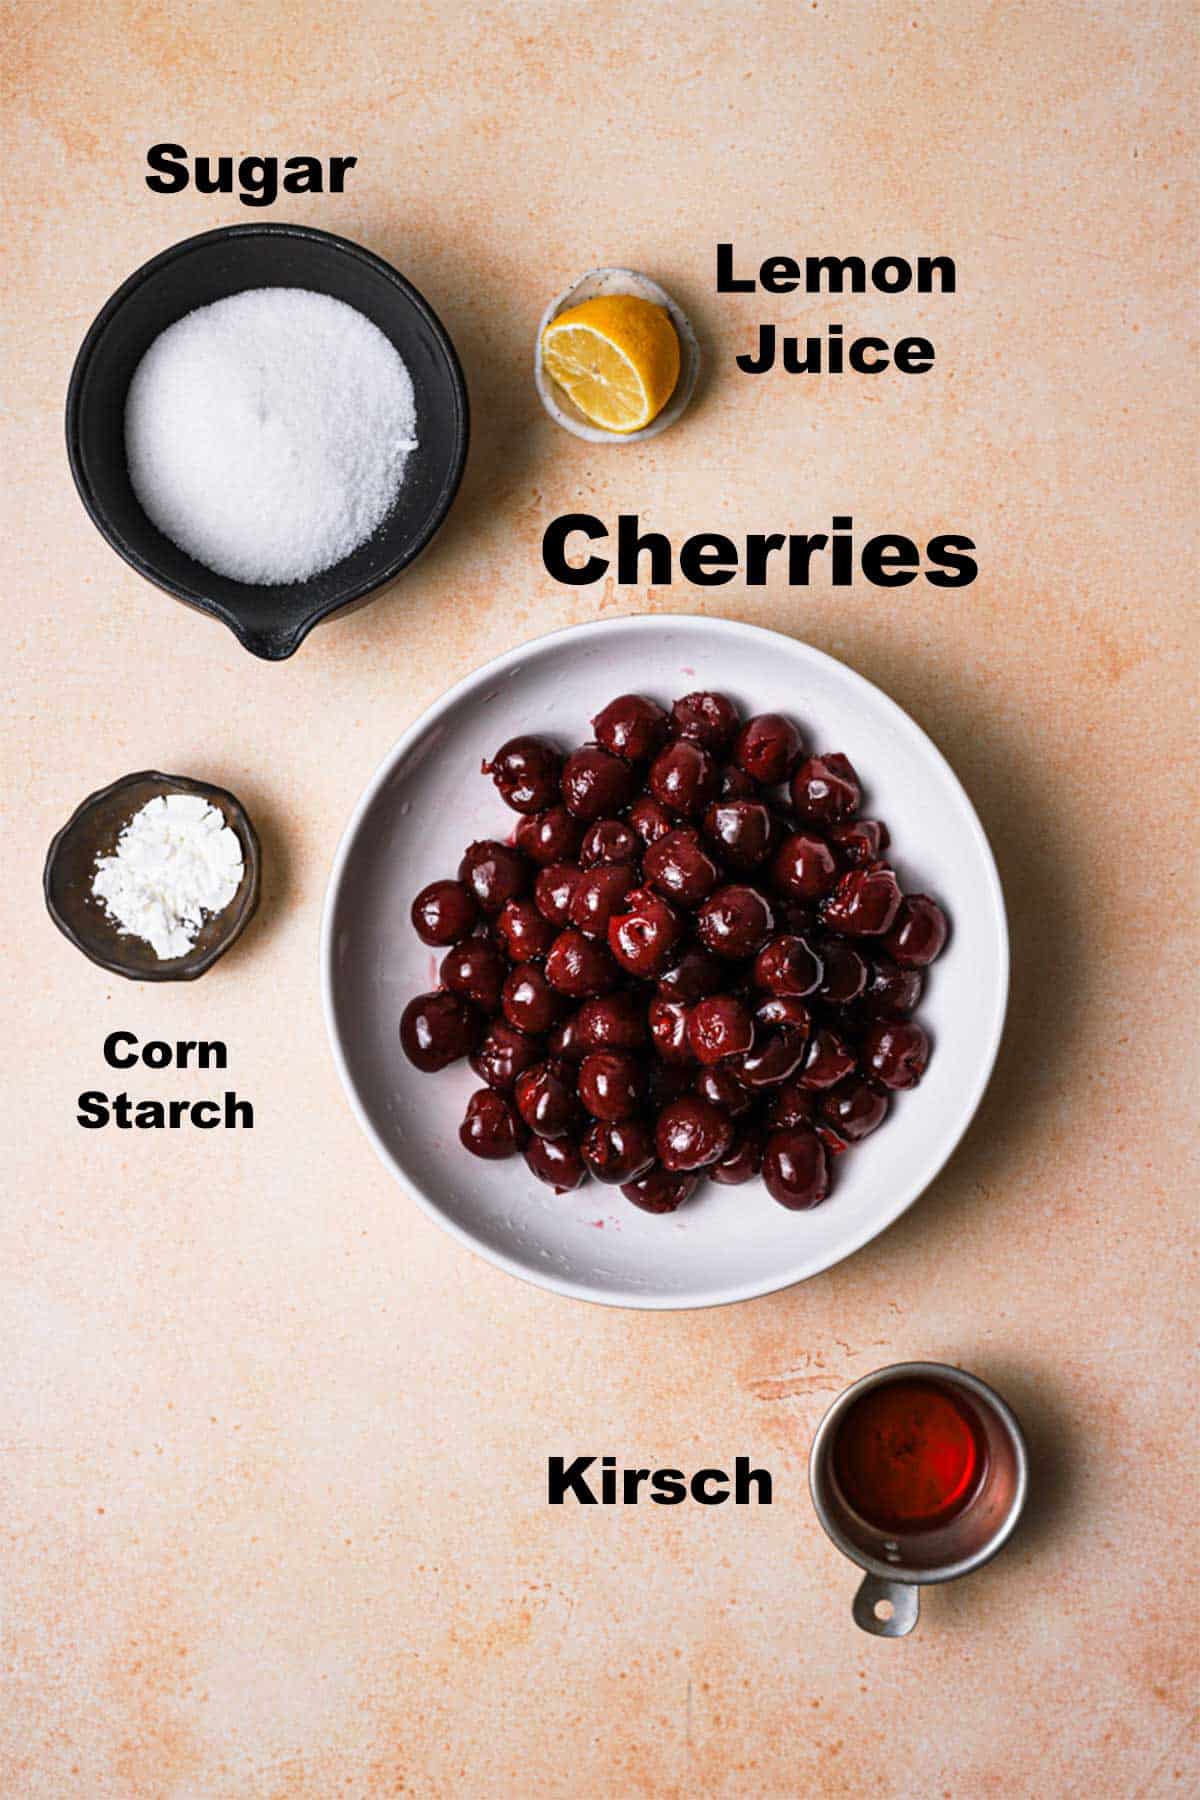 Ingredients to make cherry fillings